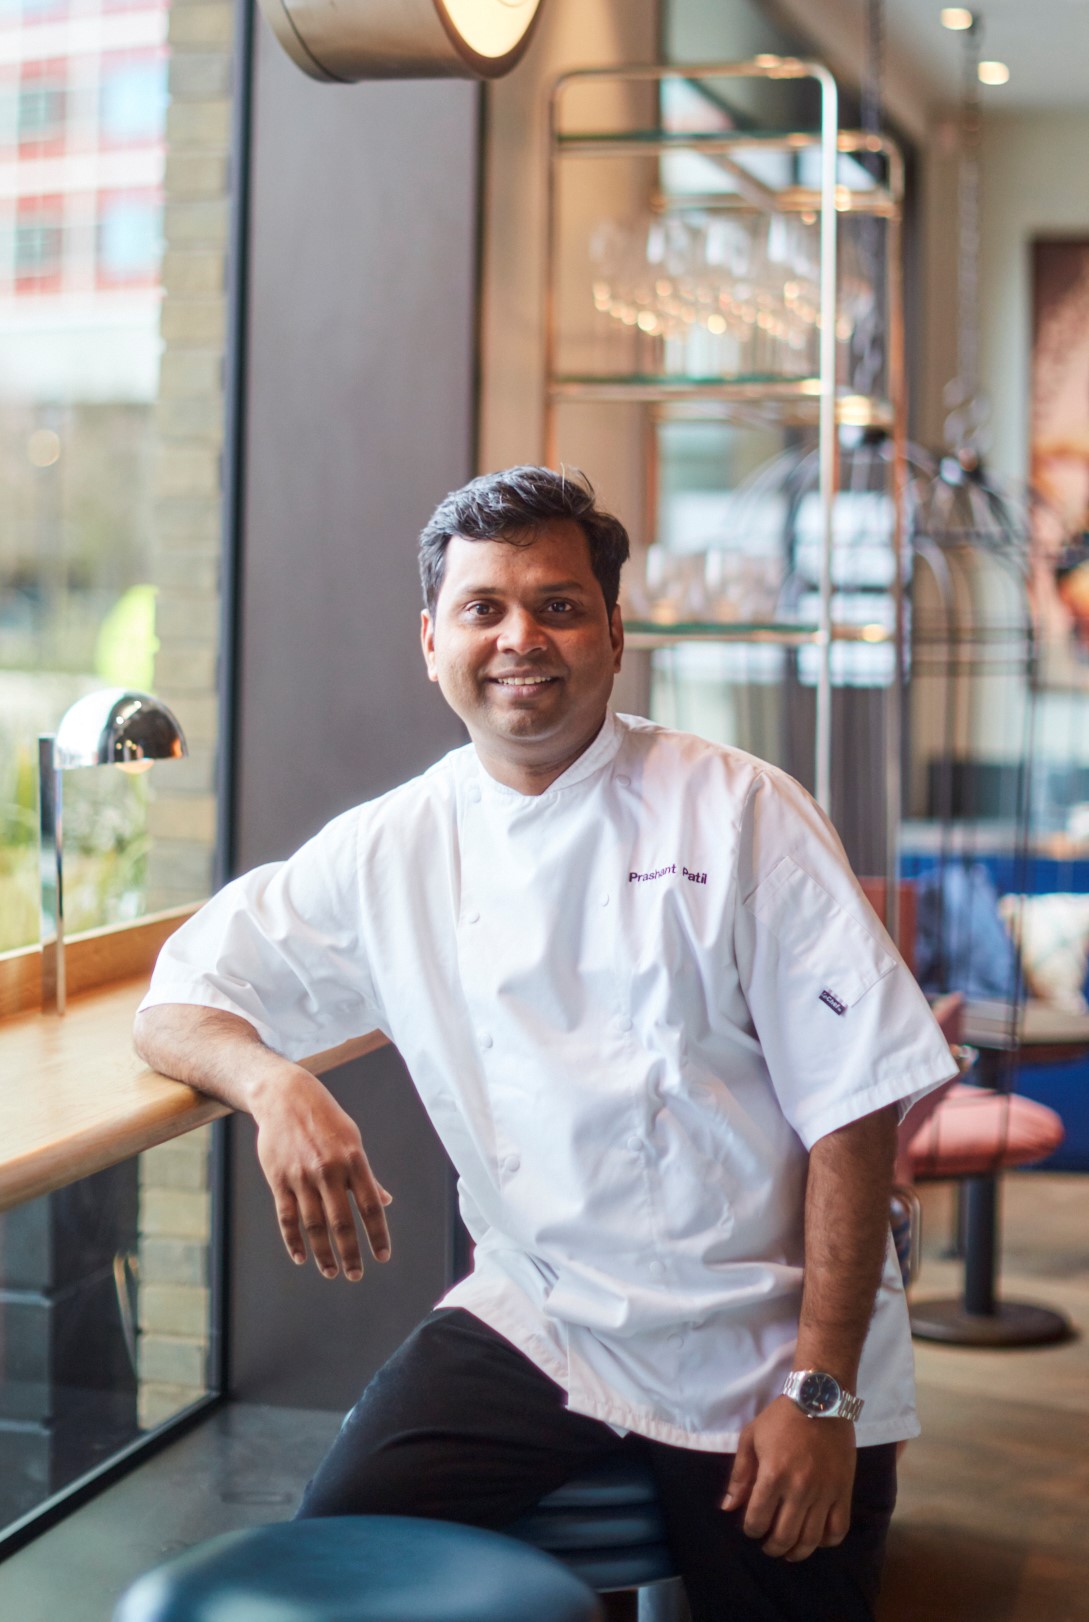 An interview with Executive Head Chef, Prashant Patil - One Moorgate Place